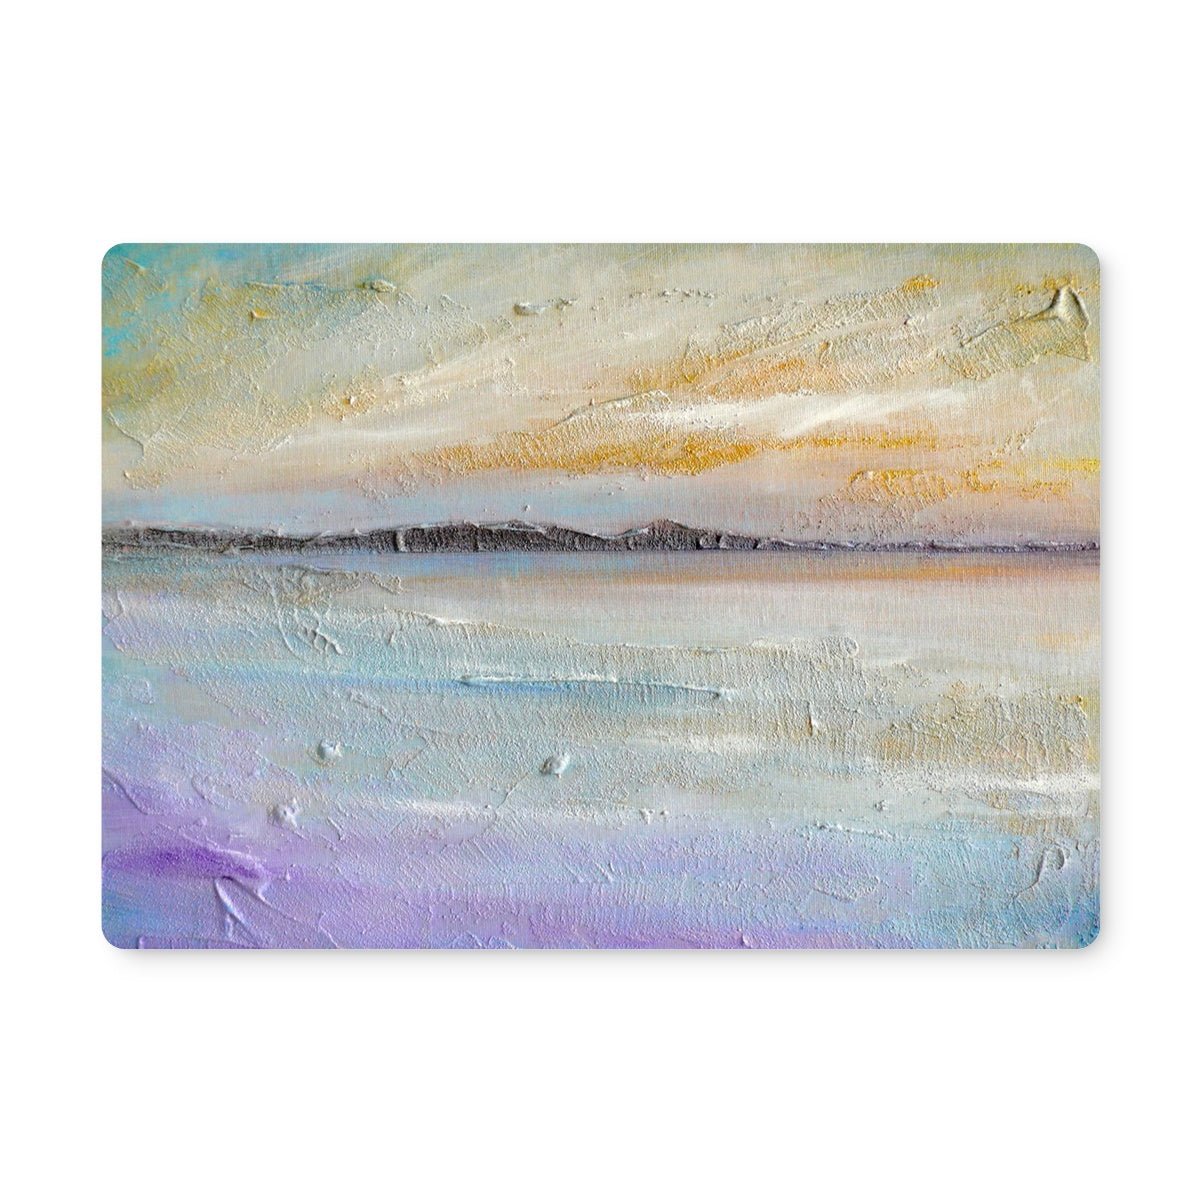 Sollas Beach South Uist Art Gifts Placemat-Placemats-Hebridean Islands Art Gallery-2 Placemats-Paintings, Prints, Homeware, Art Gifts From Scotland By Scottish Artist Kevin Hunter